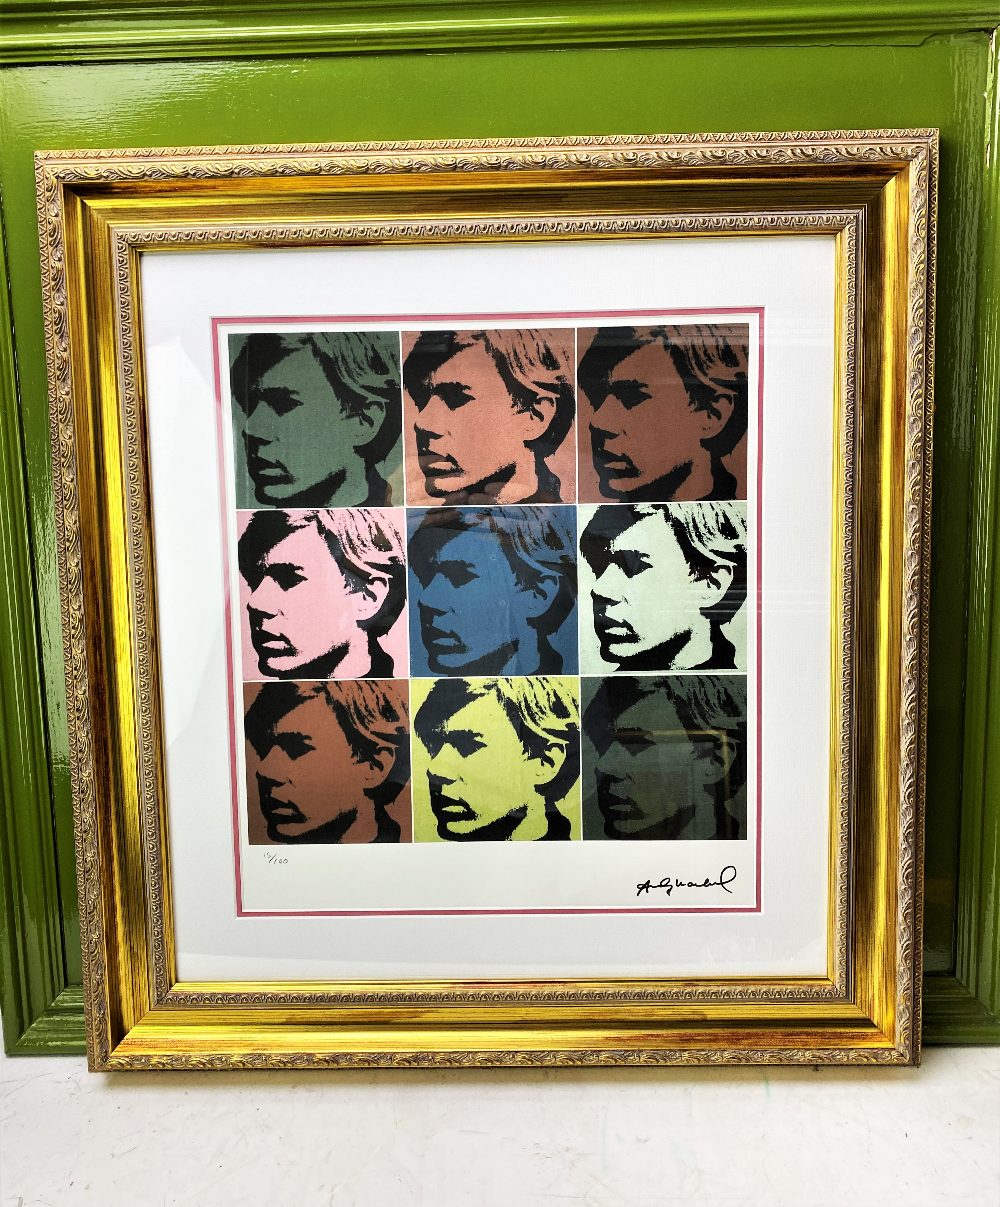 Andy Warhol (1928-1987) “Warhol Self Portrait x 4” Numbered #15/100 Lithograph, Ornate Framed.